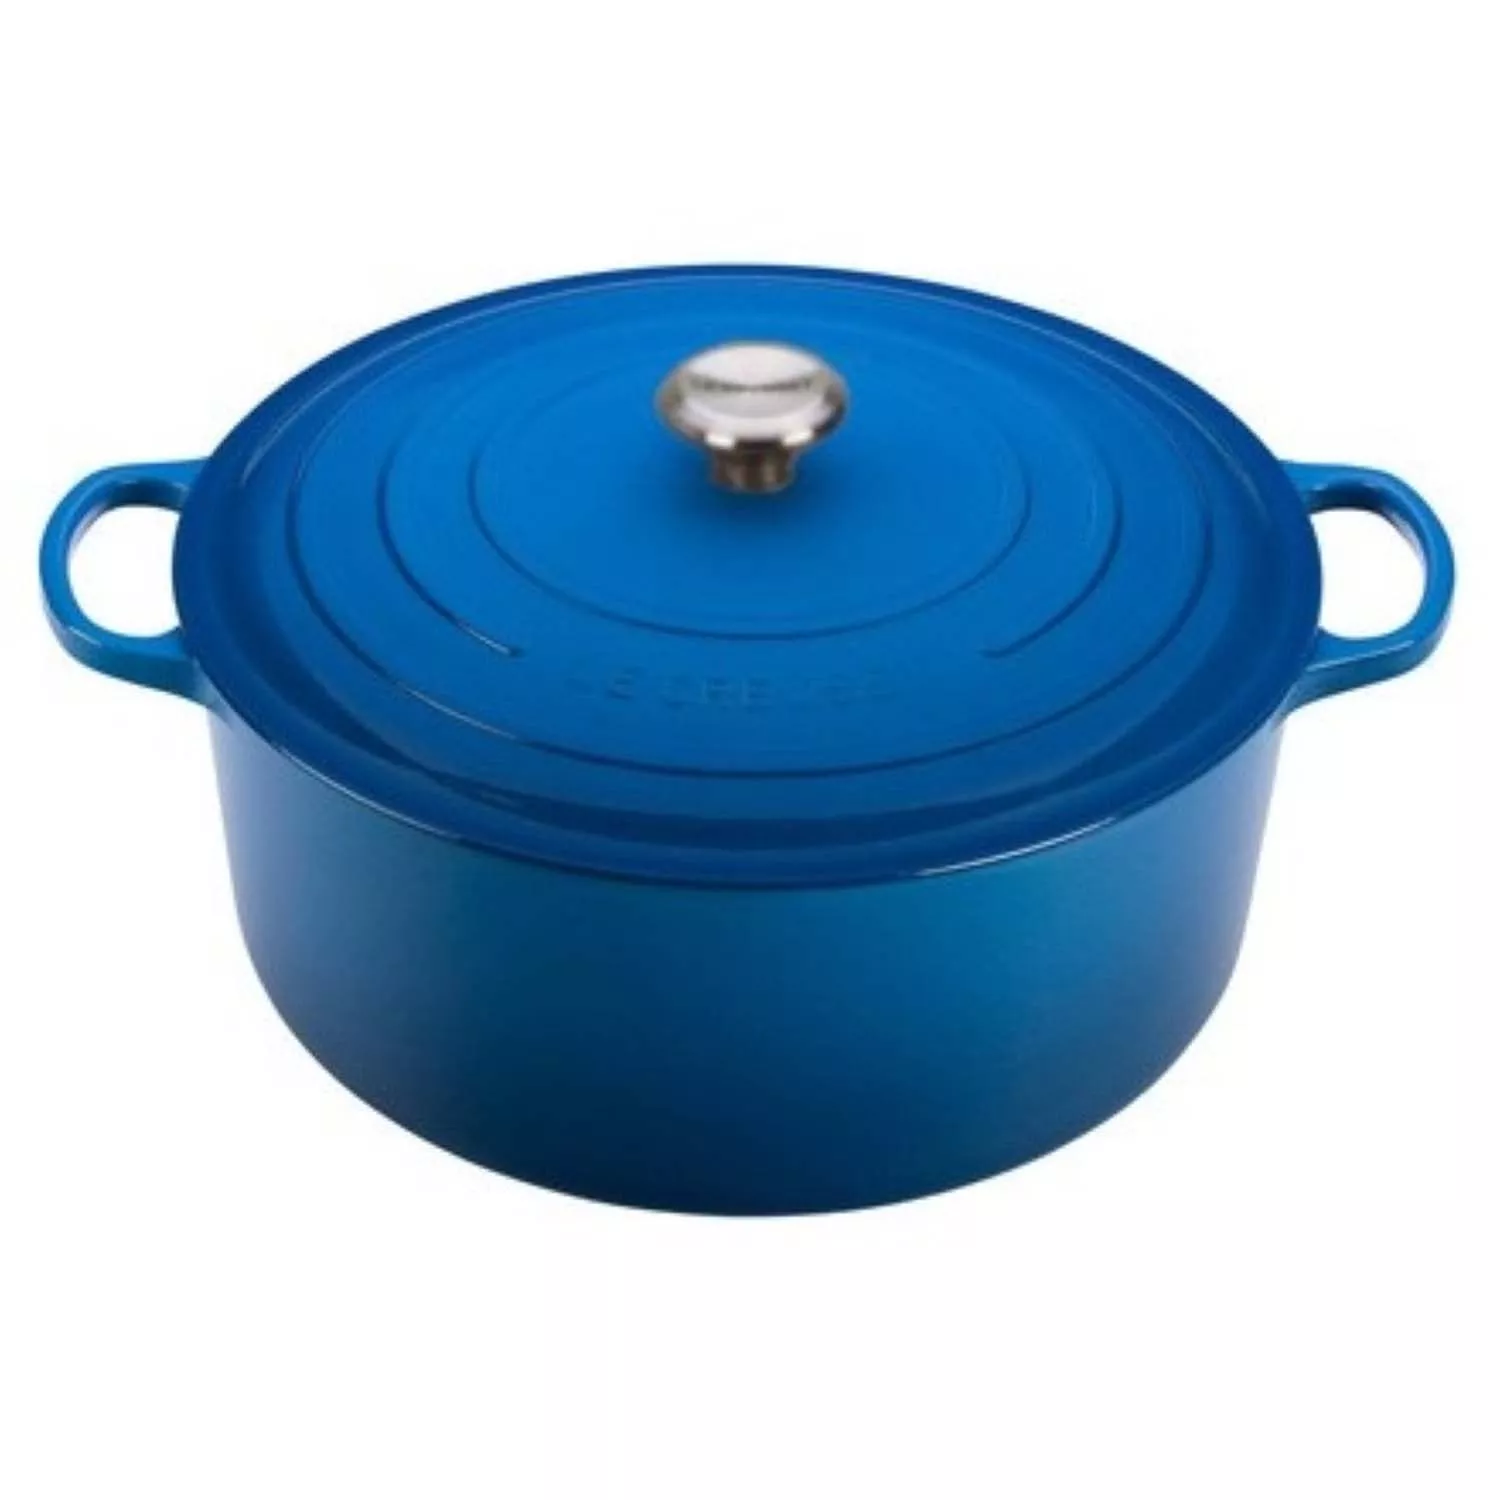 Le Creuset Dutch oven sale: Save big on the brand's most popular